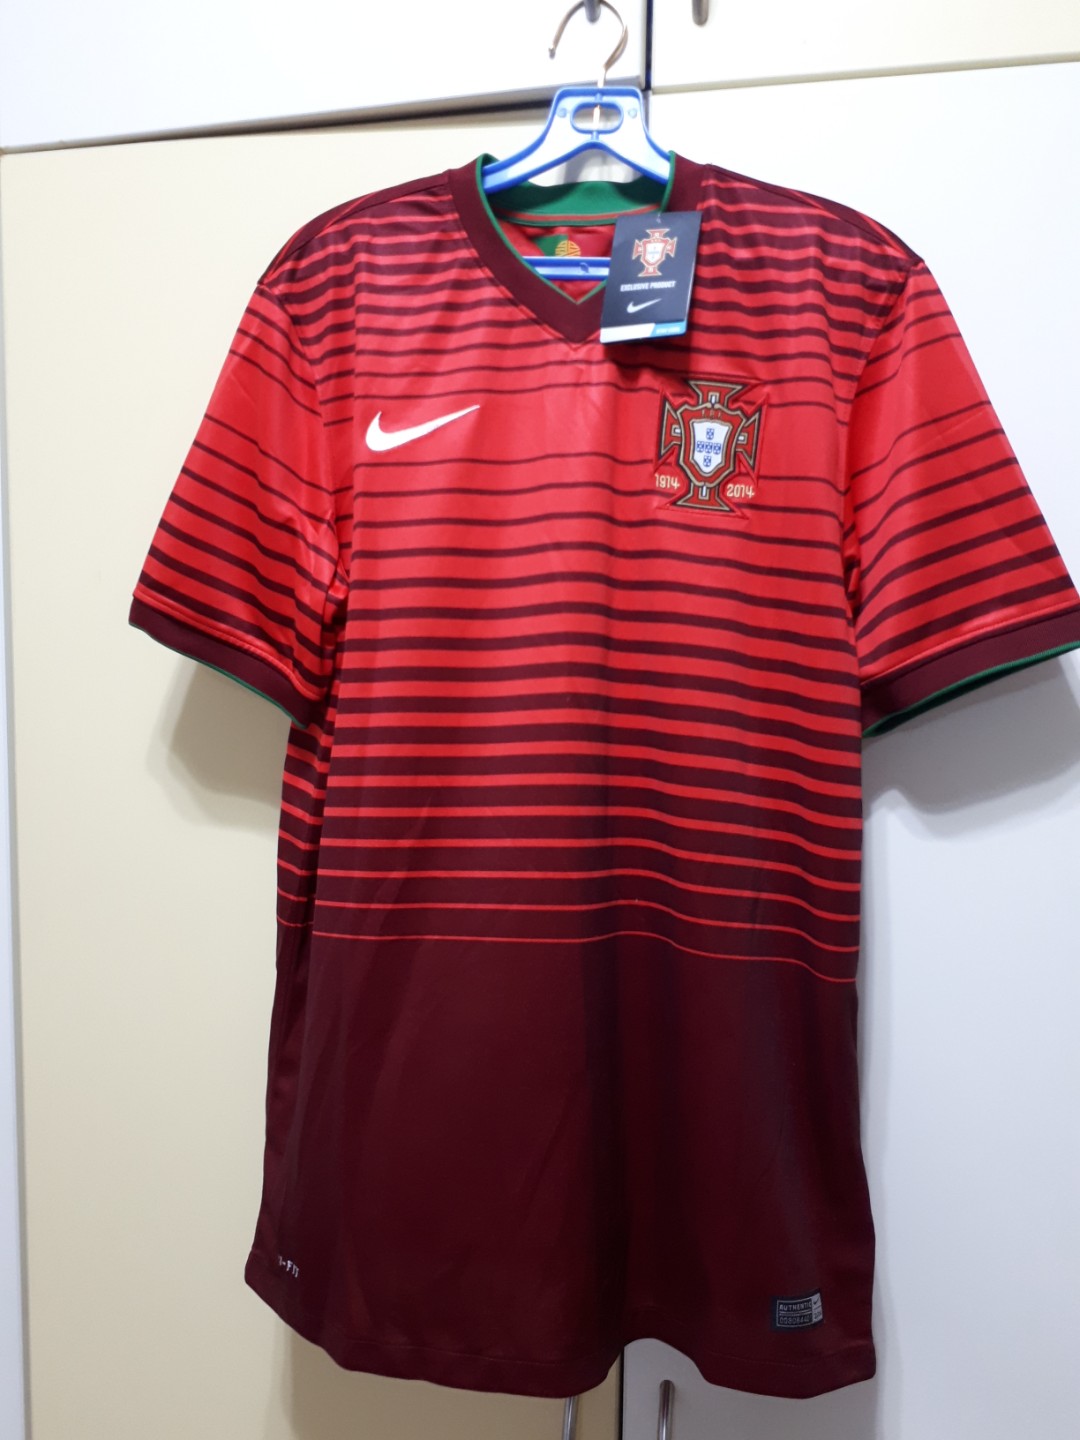 Portugal National Football team jersey 